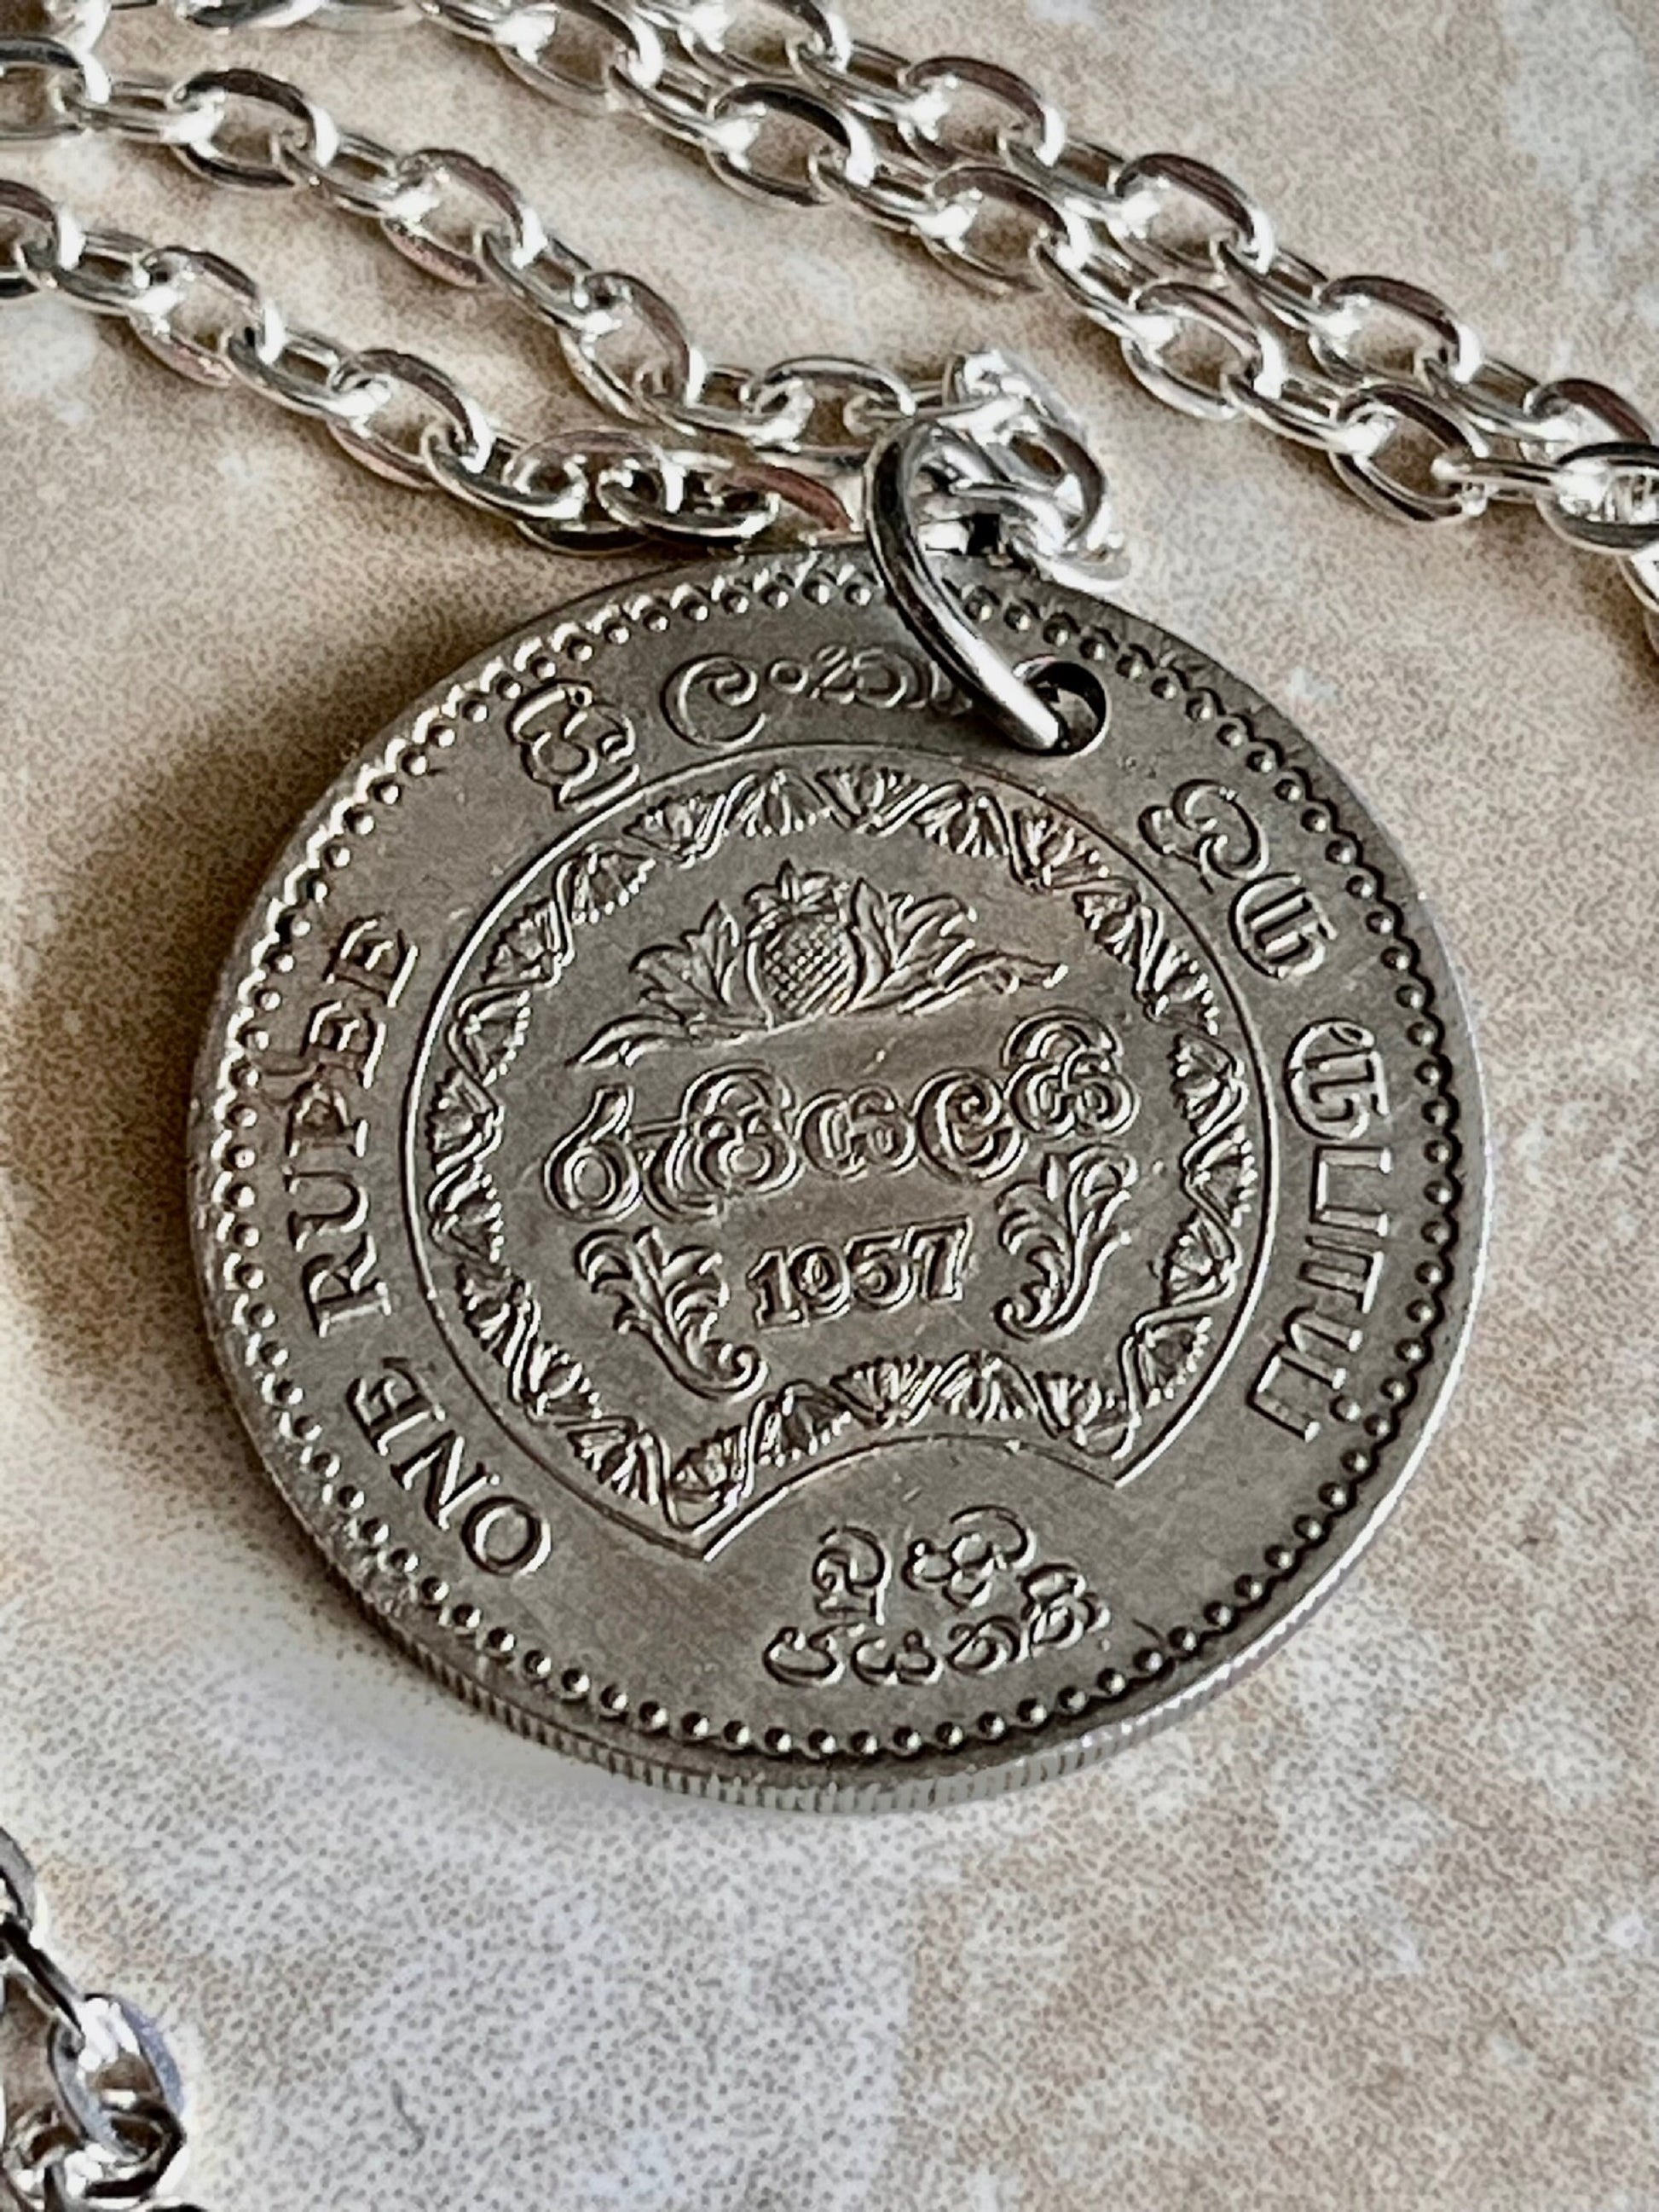 India Coin Pendant 1957 East India 1 Rupee Personal Vintage Handmade Jewelry Gift Friend Charm For Him Her World Coin Collector